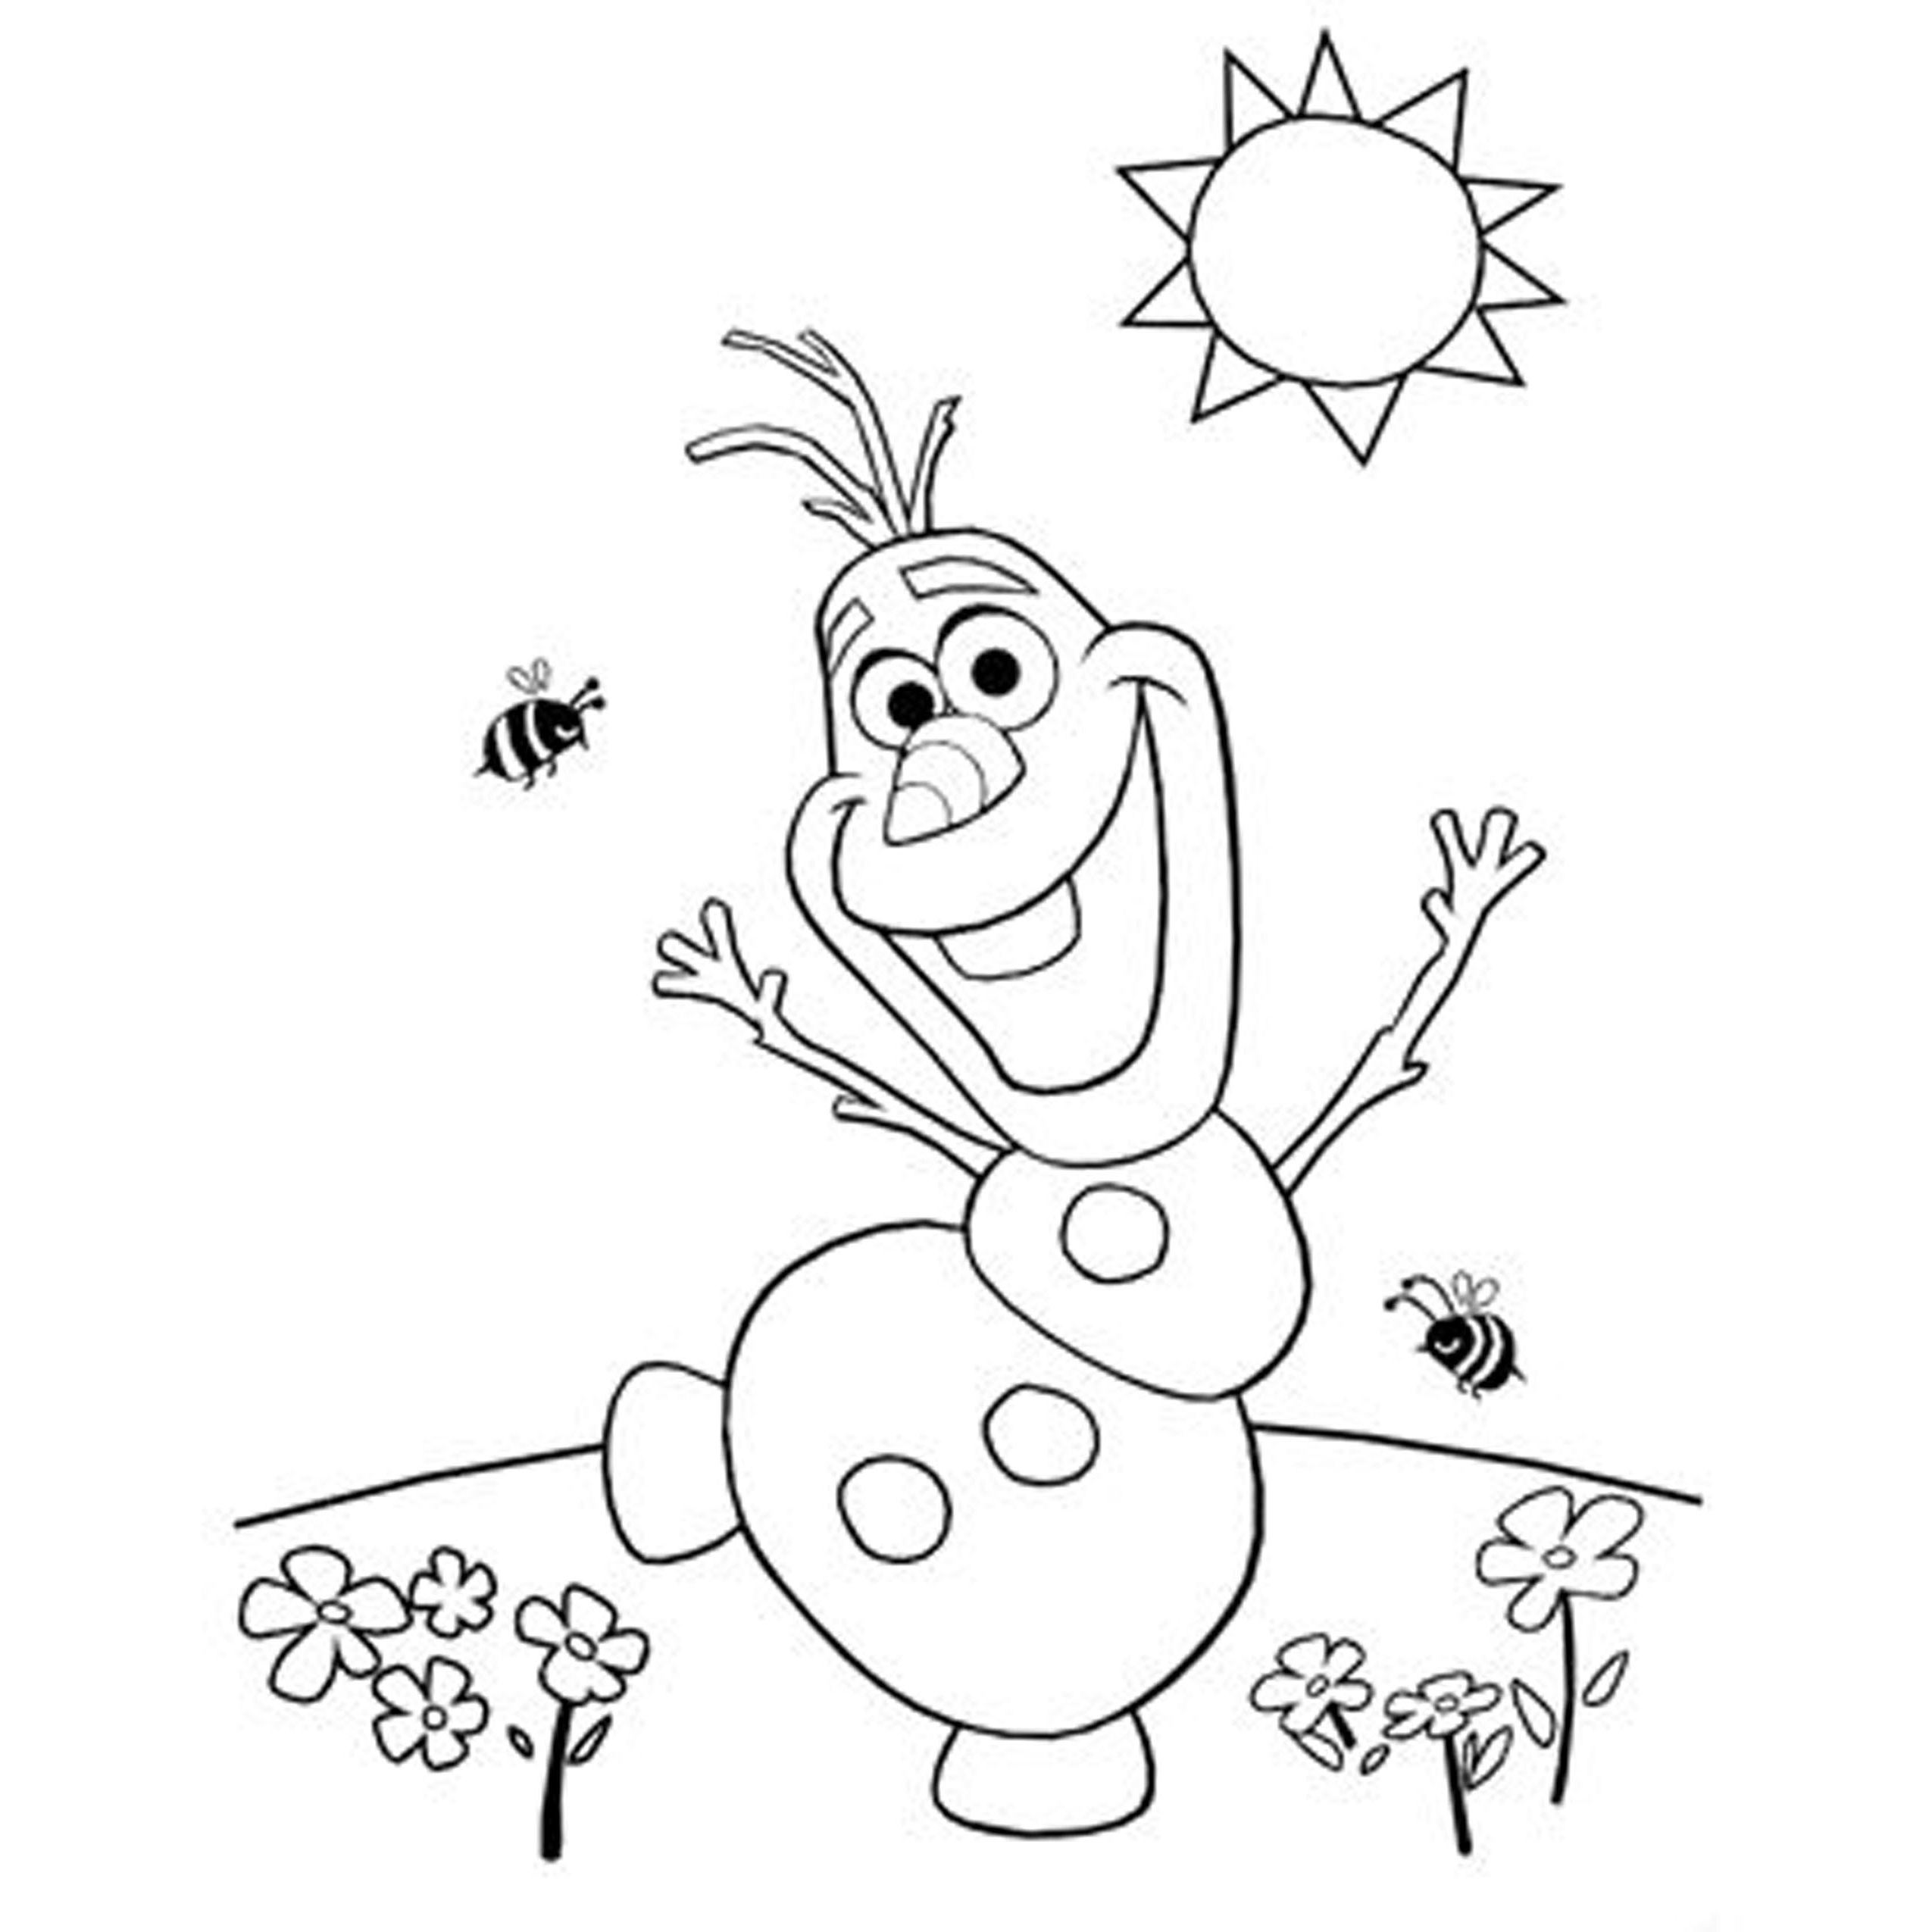 Olaf Coloring Sheets For Kids Coloring Pages